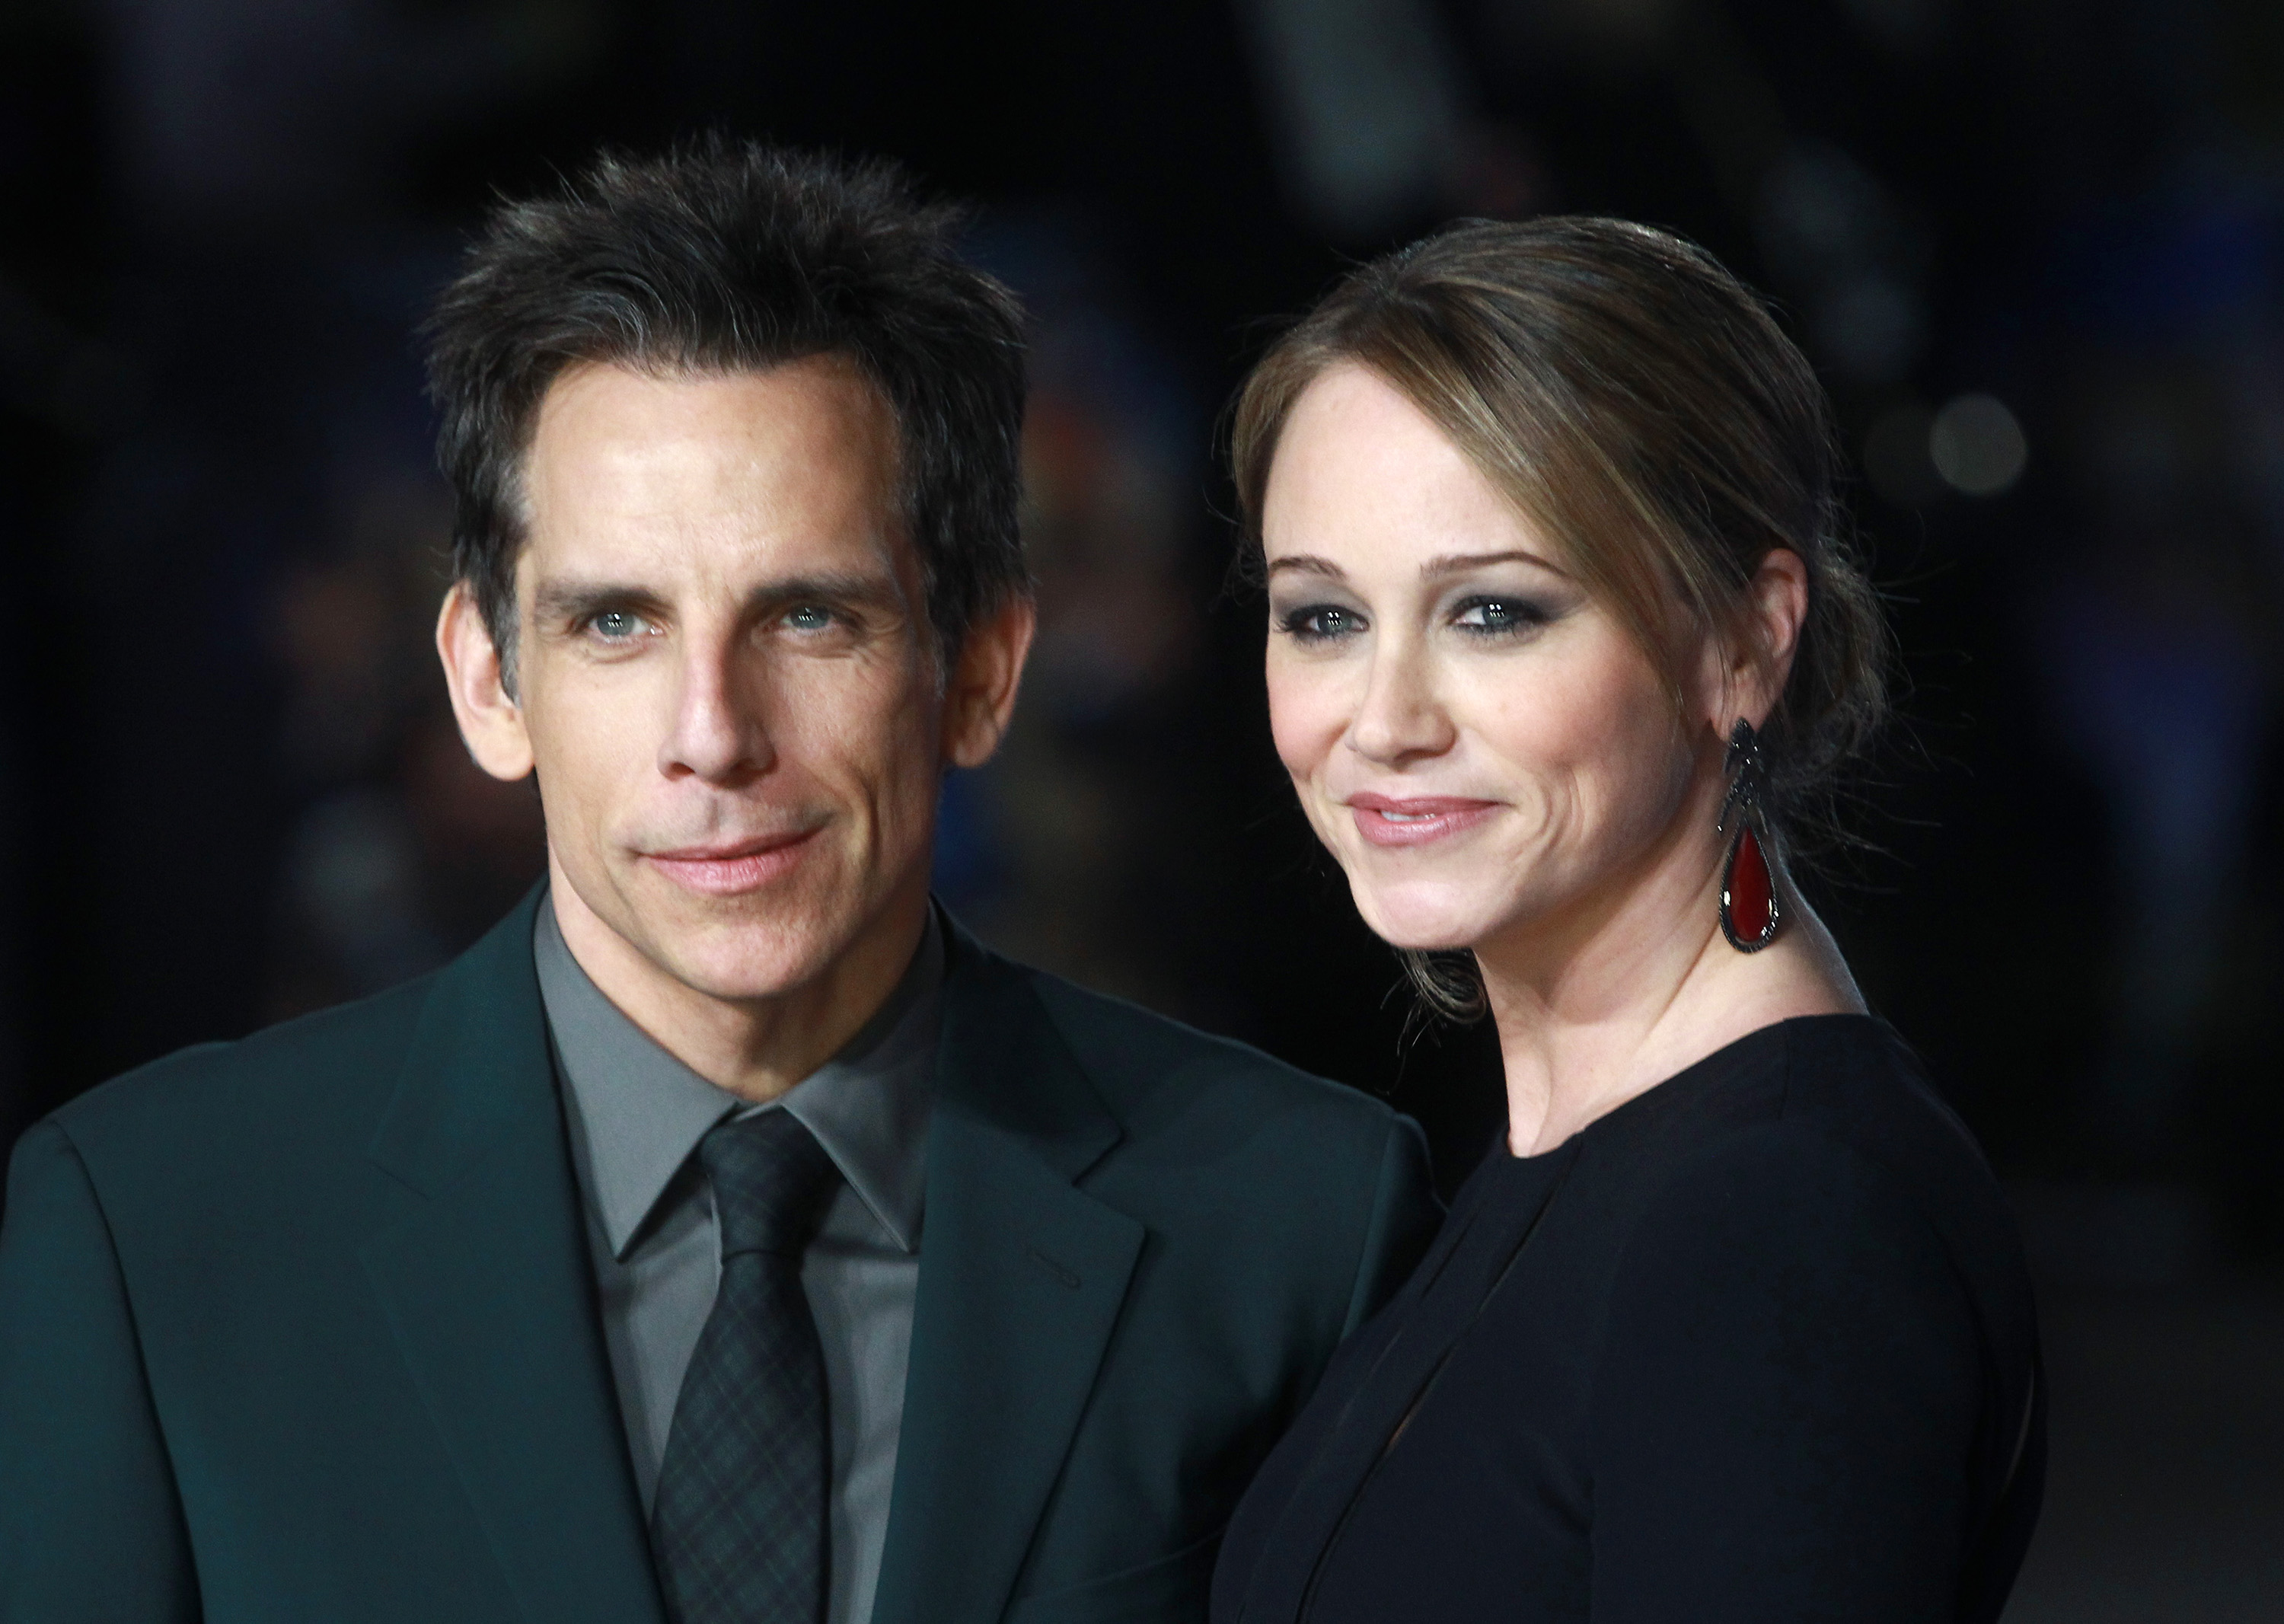 Ben Stiller and Christine Taylor attend the UK Premiere of "Night At The Museum: Secret Of The Tomb" at Empire Leicester Square on December 15, 2014 in London, England. (Fred Duval&mdash;FilmMagic)